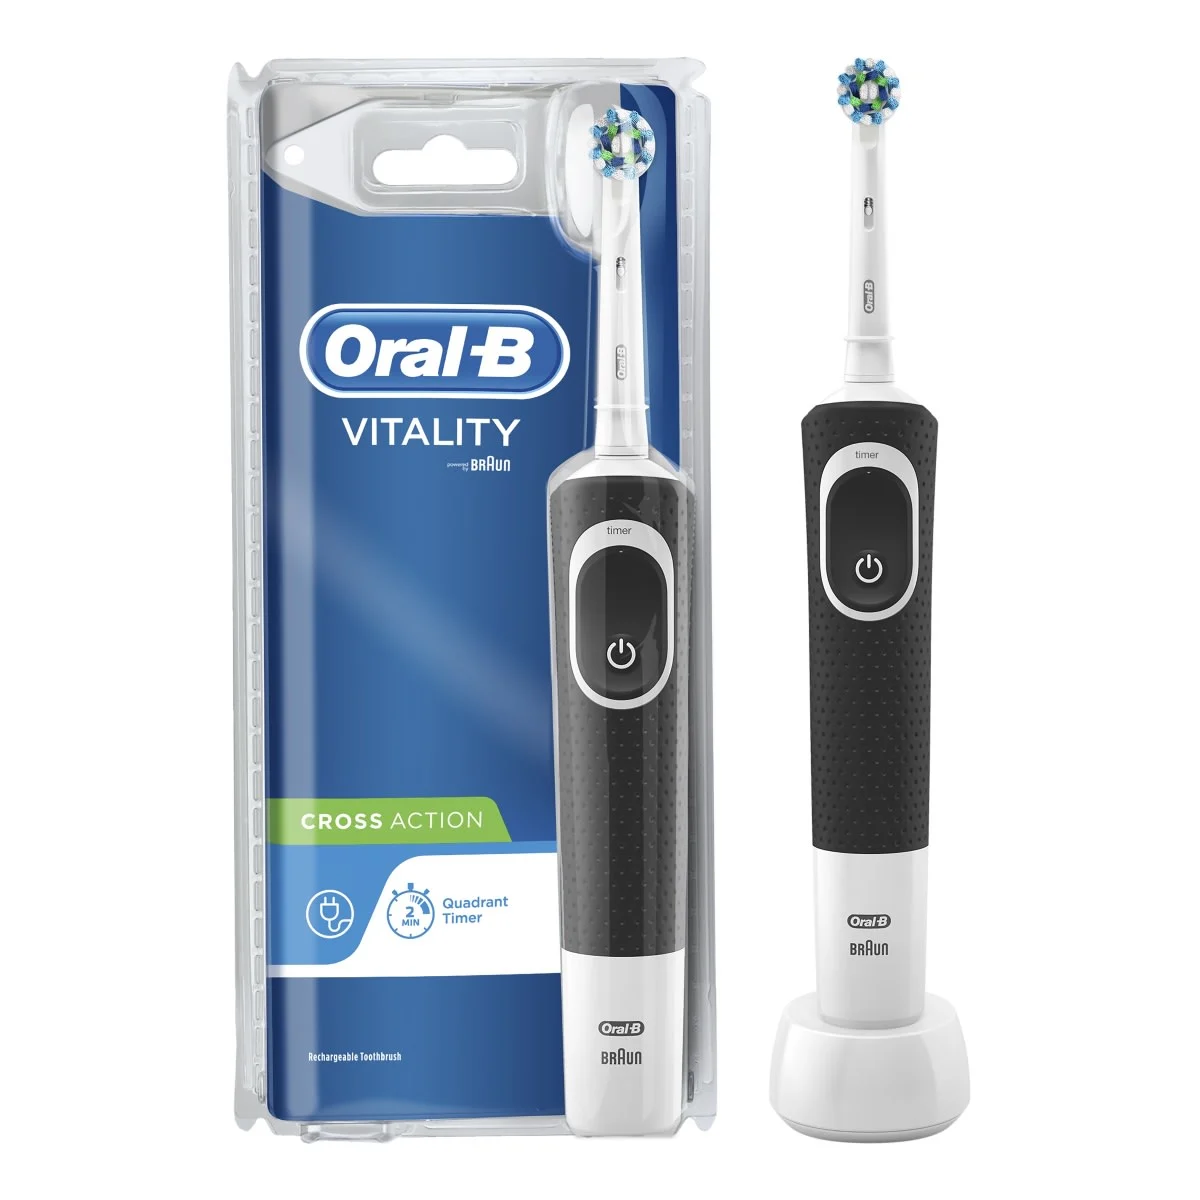 Oral-B Vitality Cross Action Electric Toothbrush 